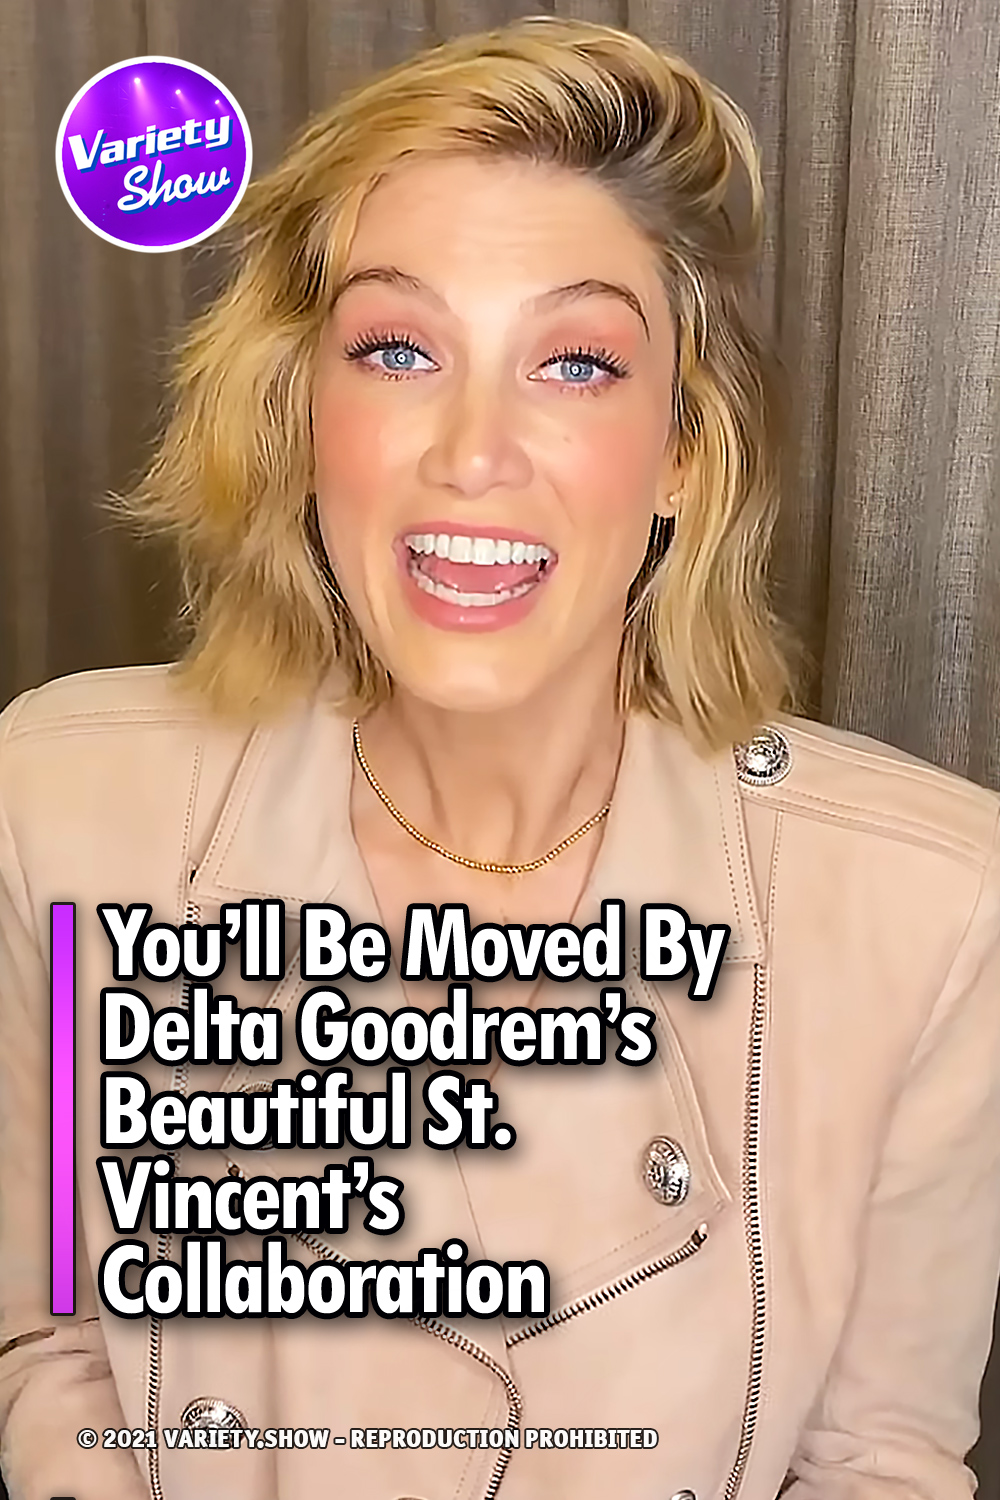 You’ll Be Moved By Delta Goodrem’s Beautiful St. Vincent’s Collaboration